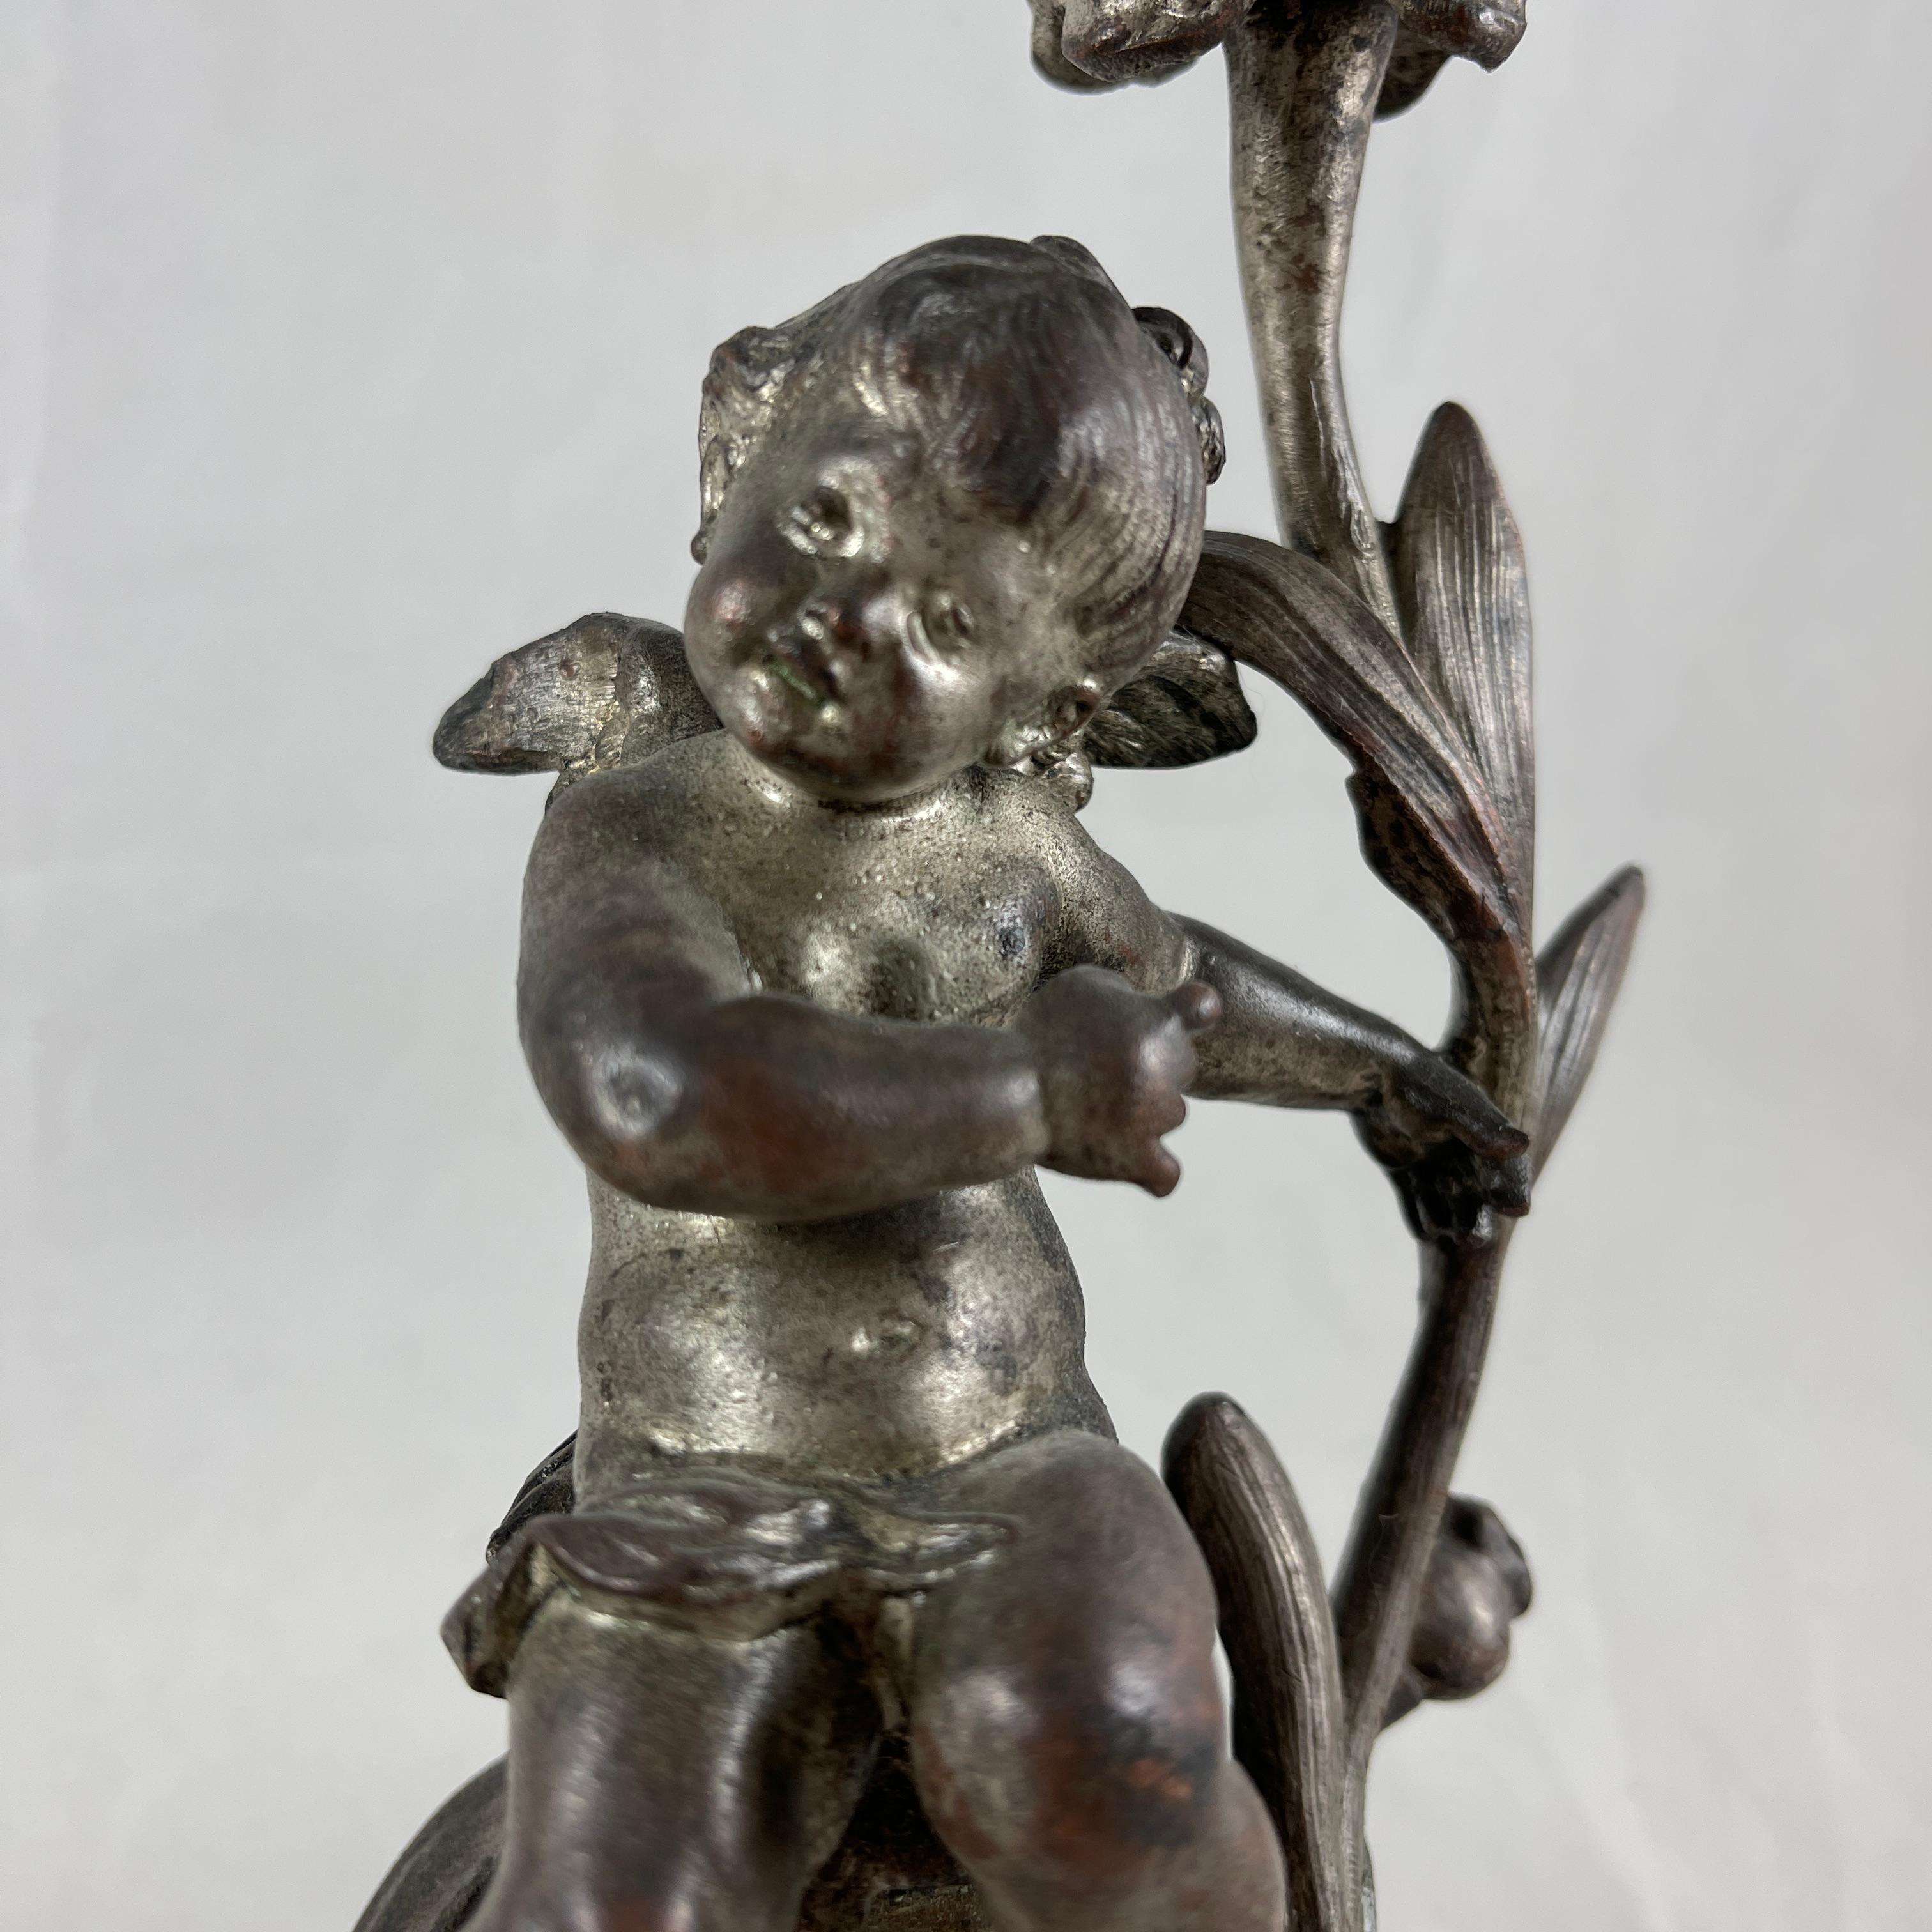 Belle Époque French Putti Cherub Candlesticks Signed Sylvain Kinsburger Spelter & Marble S/2 For Sale